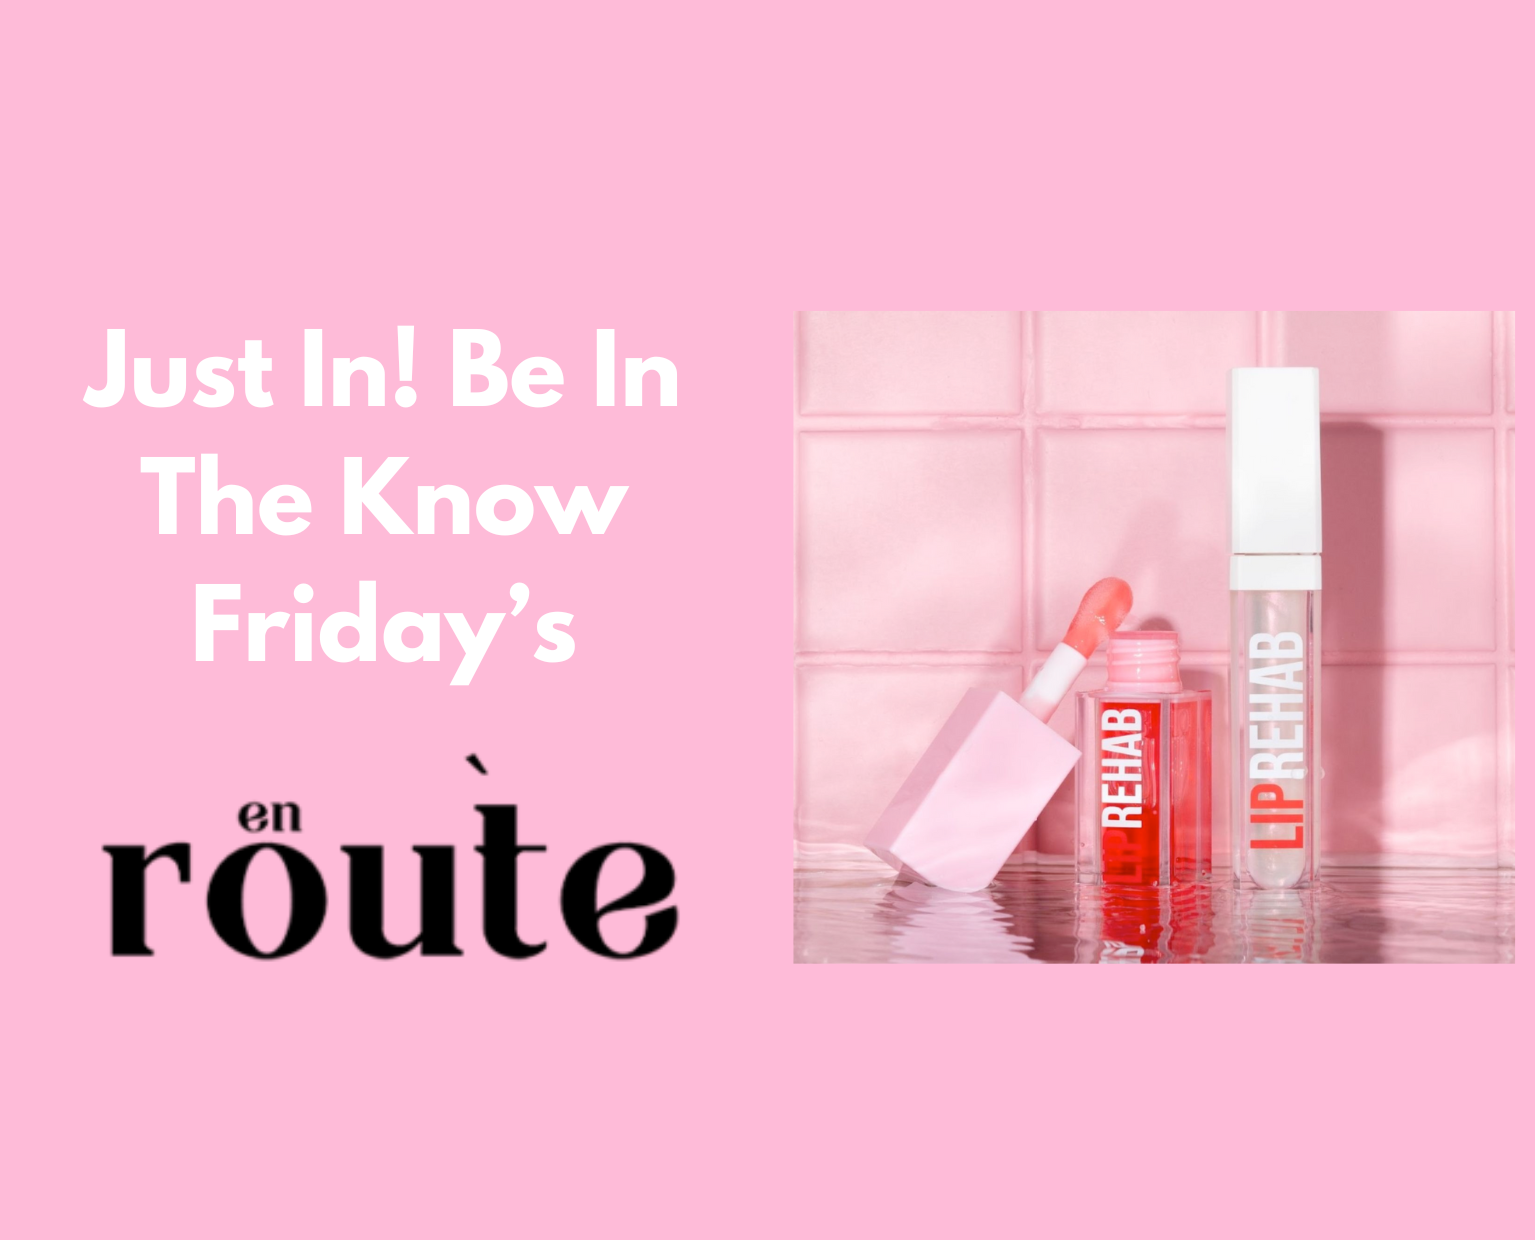 Just In! Be In The Know Friday’s A weekly round up of fashion, lifestyle and beauty news to keep you in the know